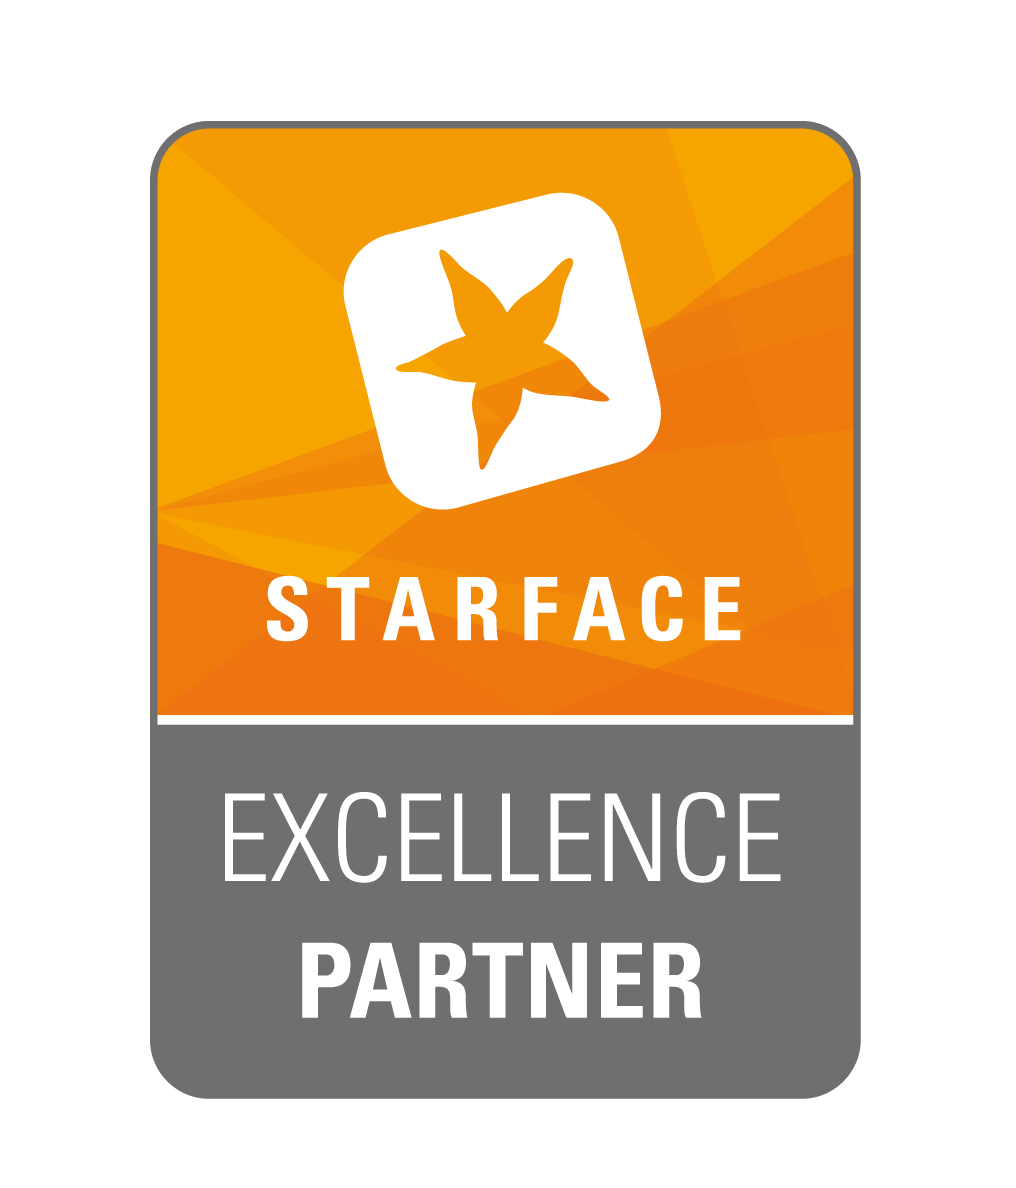 STARFACE-Partner - Excellence